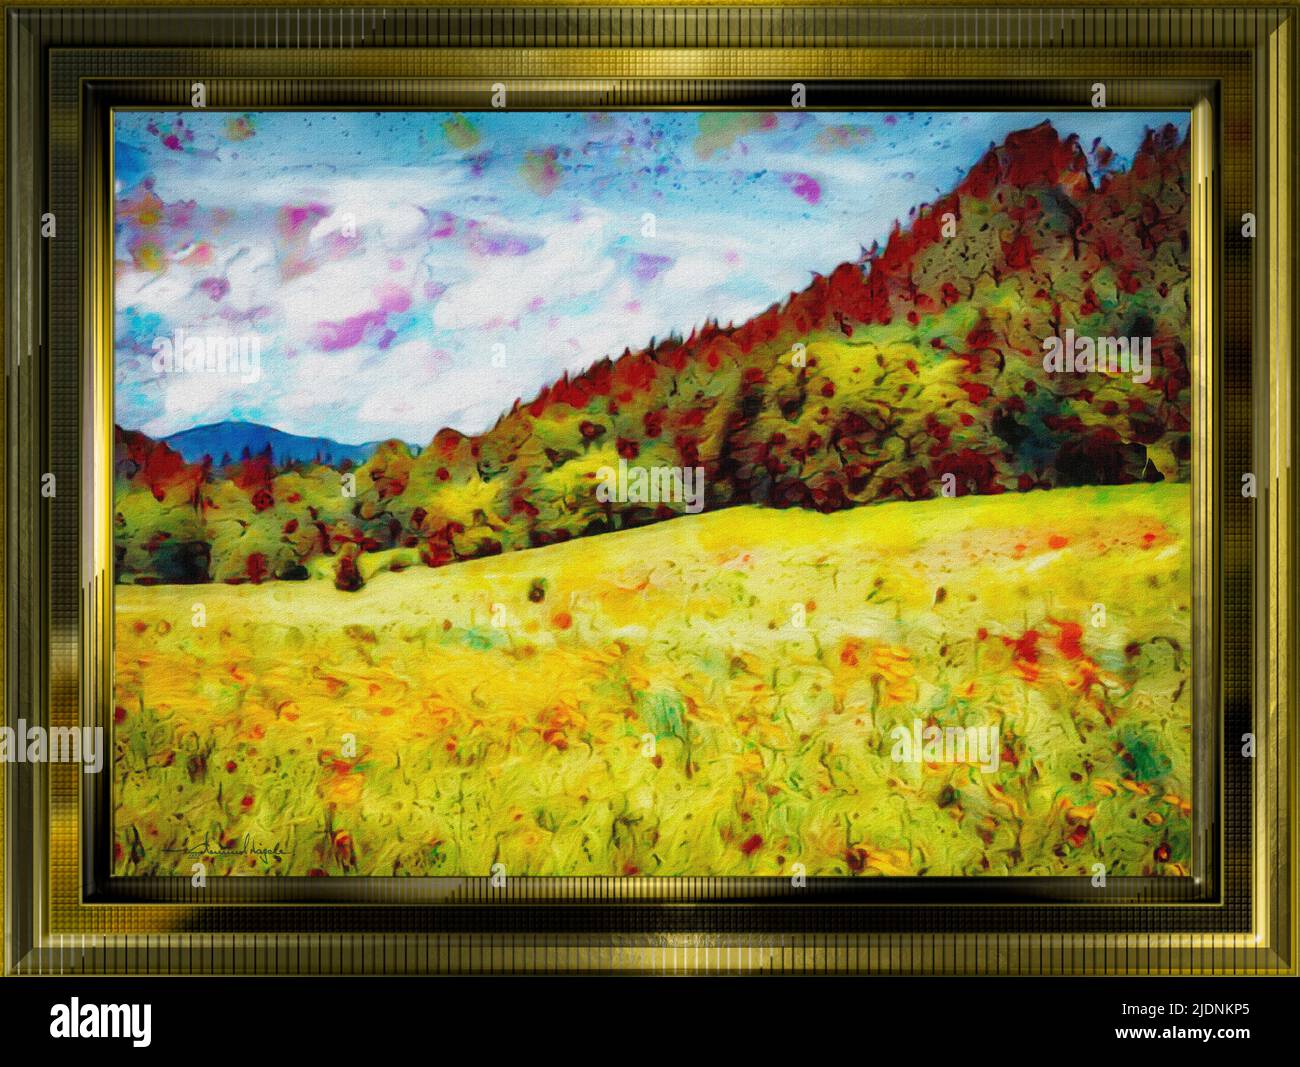 CONTEMPORARY ART: Hirschbachtal (Hirschbach Valley nr. Lenggries, Oberbayern, Germany) Stock Photo